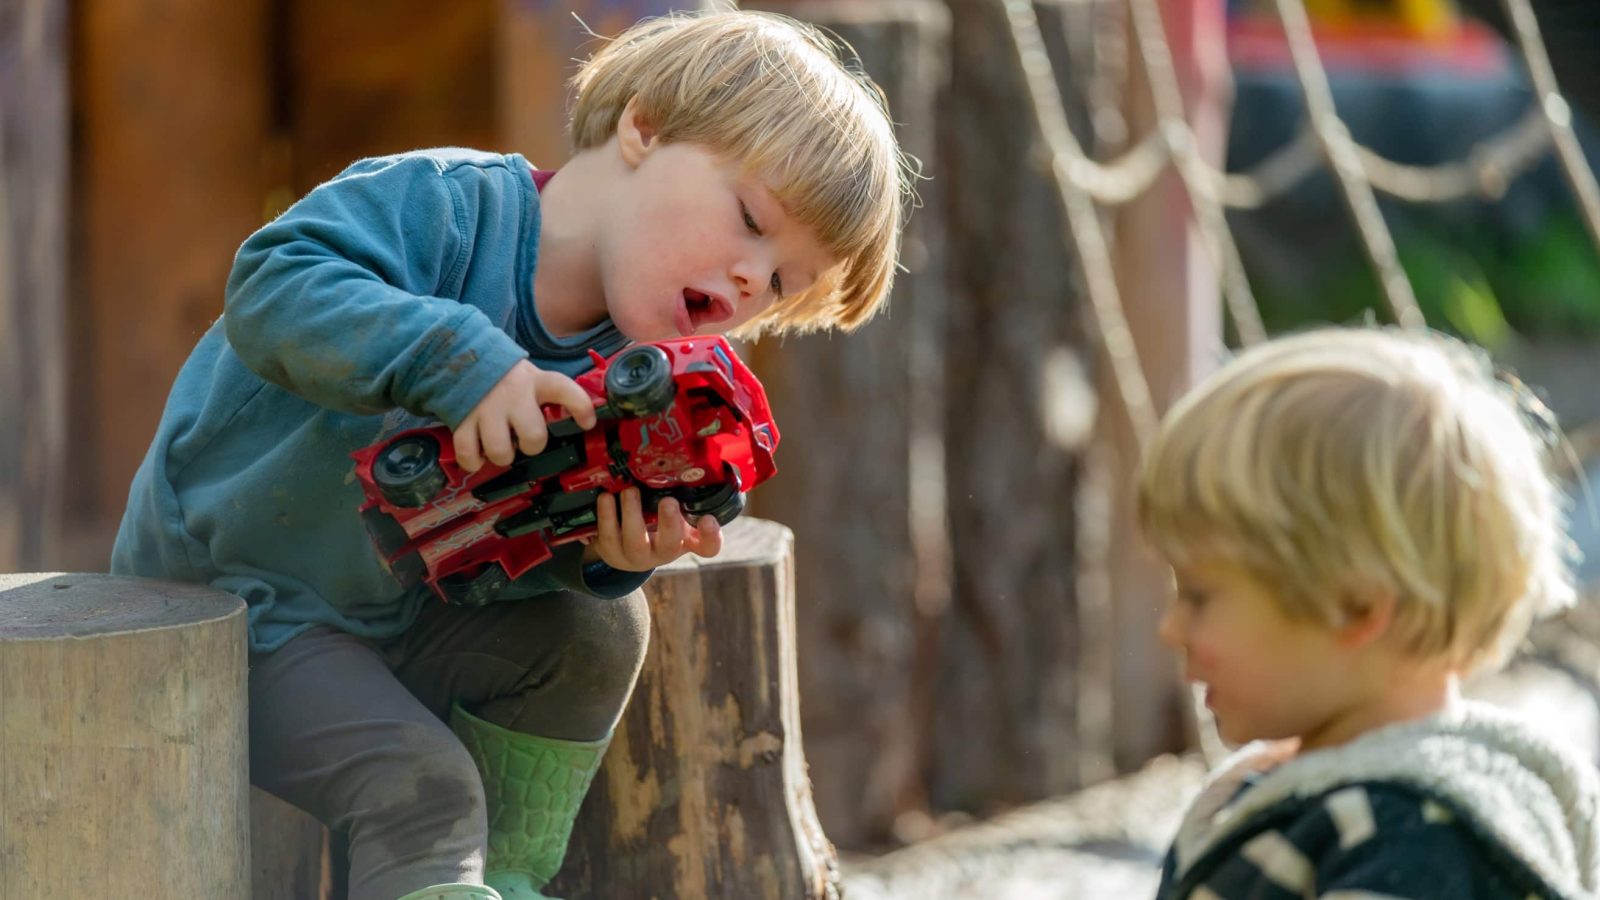 A young boy in a blue shirt, intensely focused on fixing a red toy car, as another boy watches him, seated outdoors on a sunny day. This scene was captured for a brand strategy campaign demonstrating